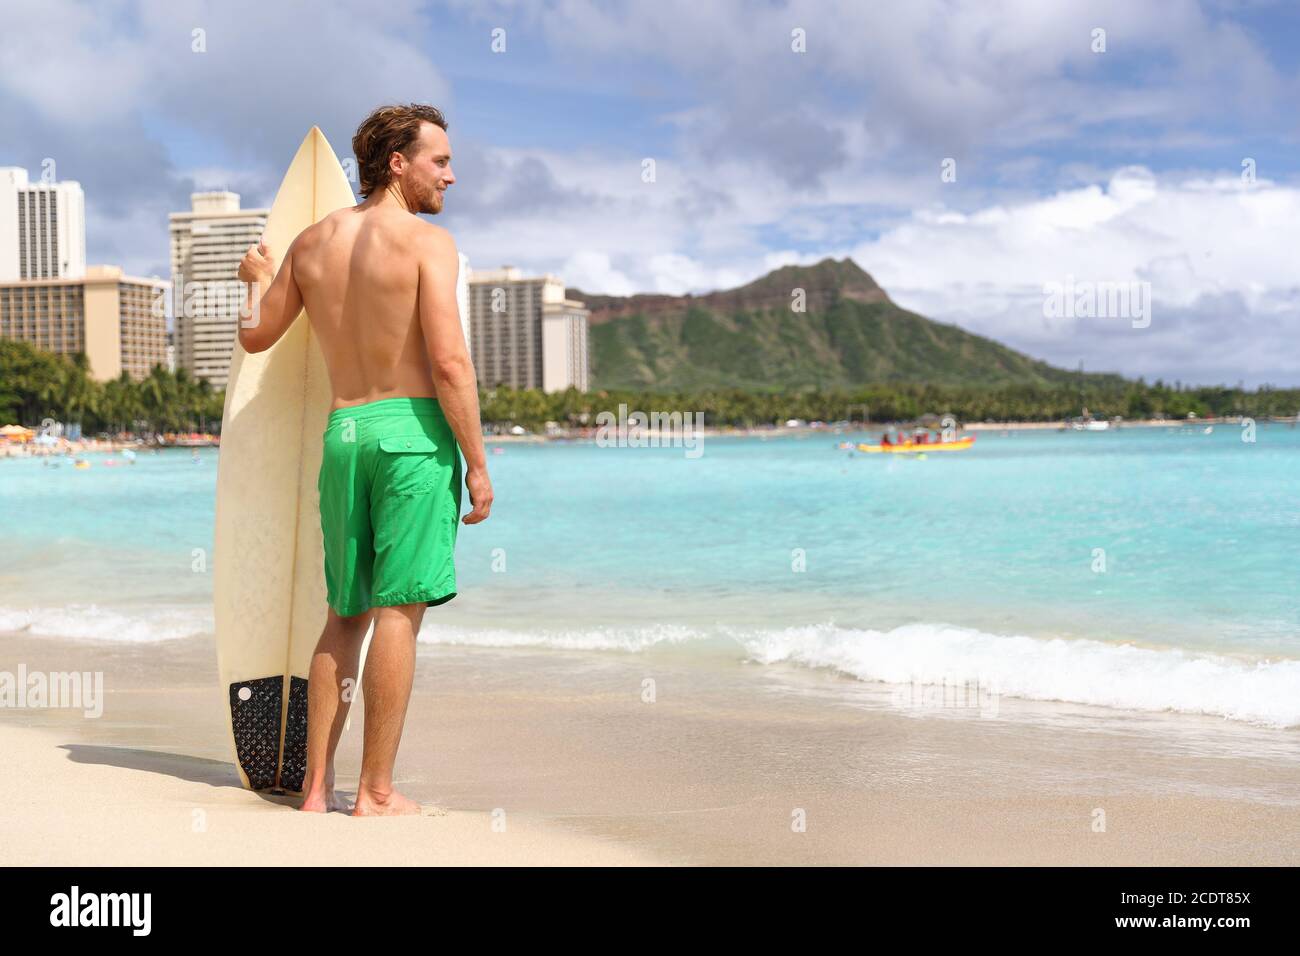 Hawaii surf man surfer surfing on Waikiki beach. Athlete standing with surfboard looking at ocean water, diamond head mountain in the landscape Stock Photo